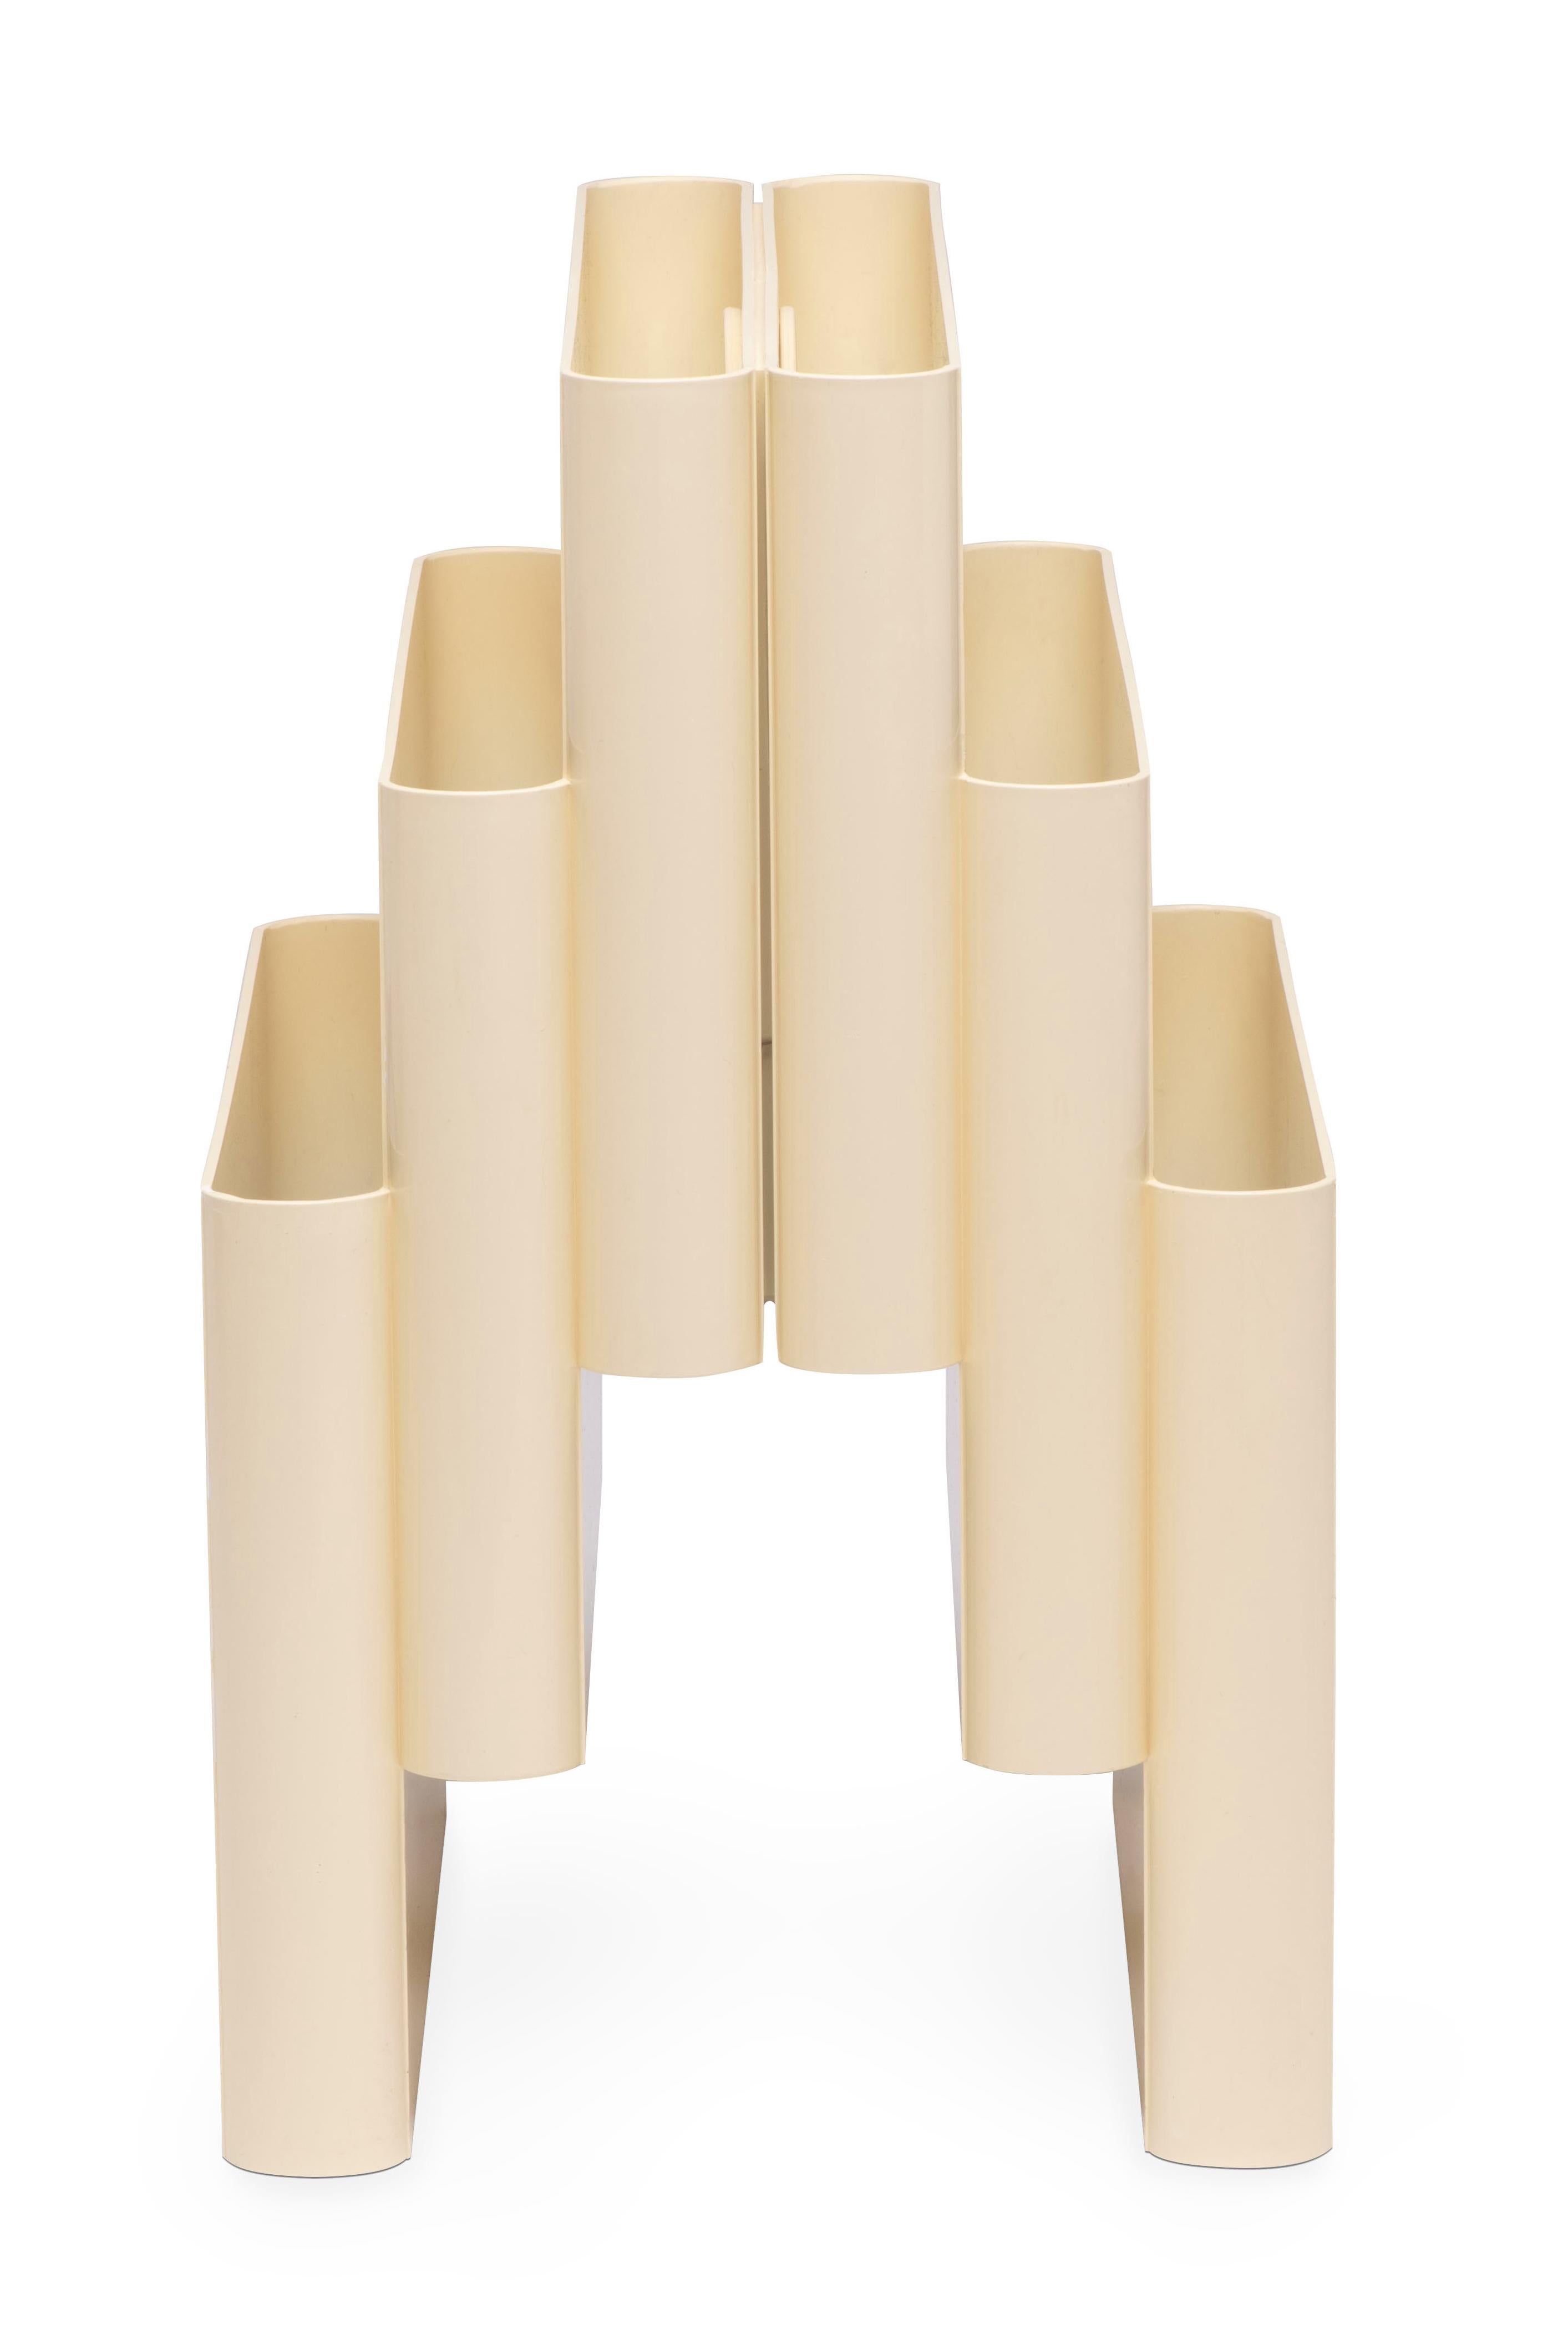 Late 20th Century Giotto Stoppino, Beige 4675 Magazine Holder, 1972 For Sale